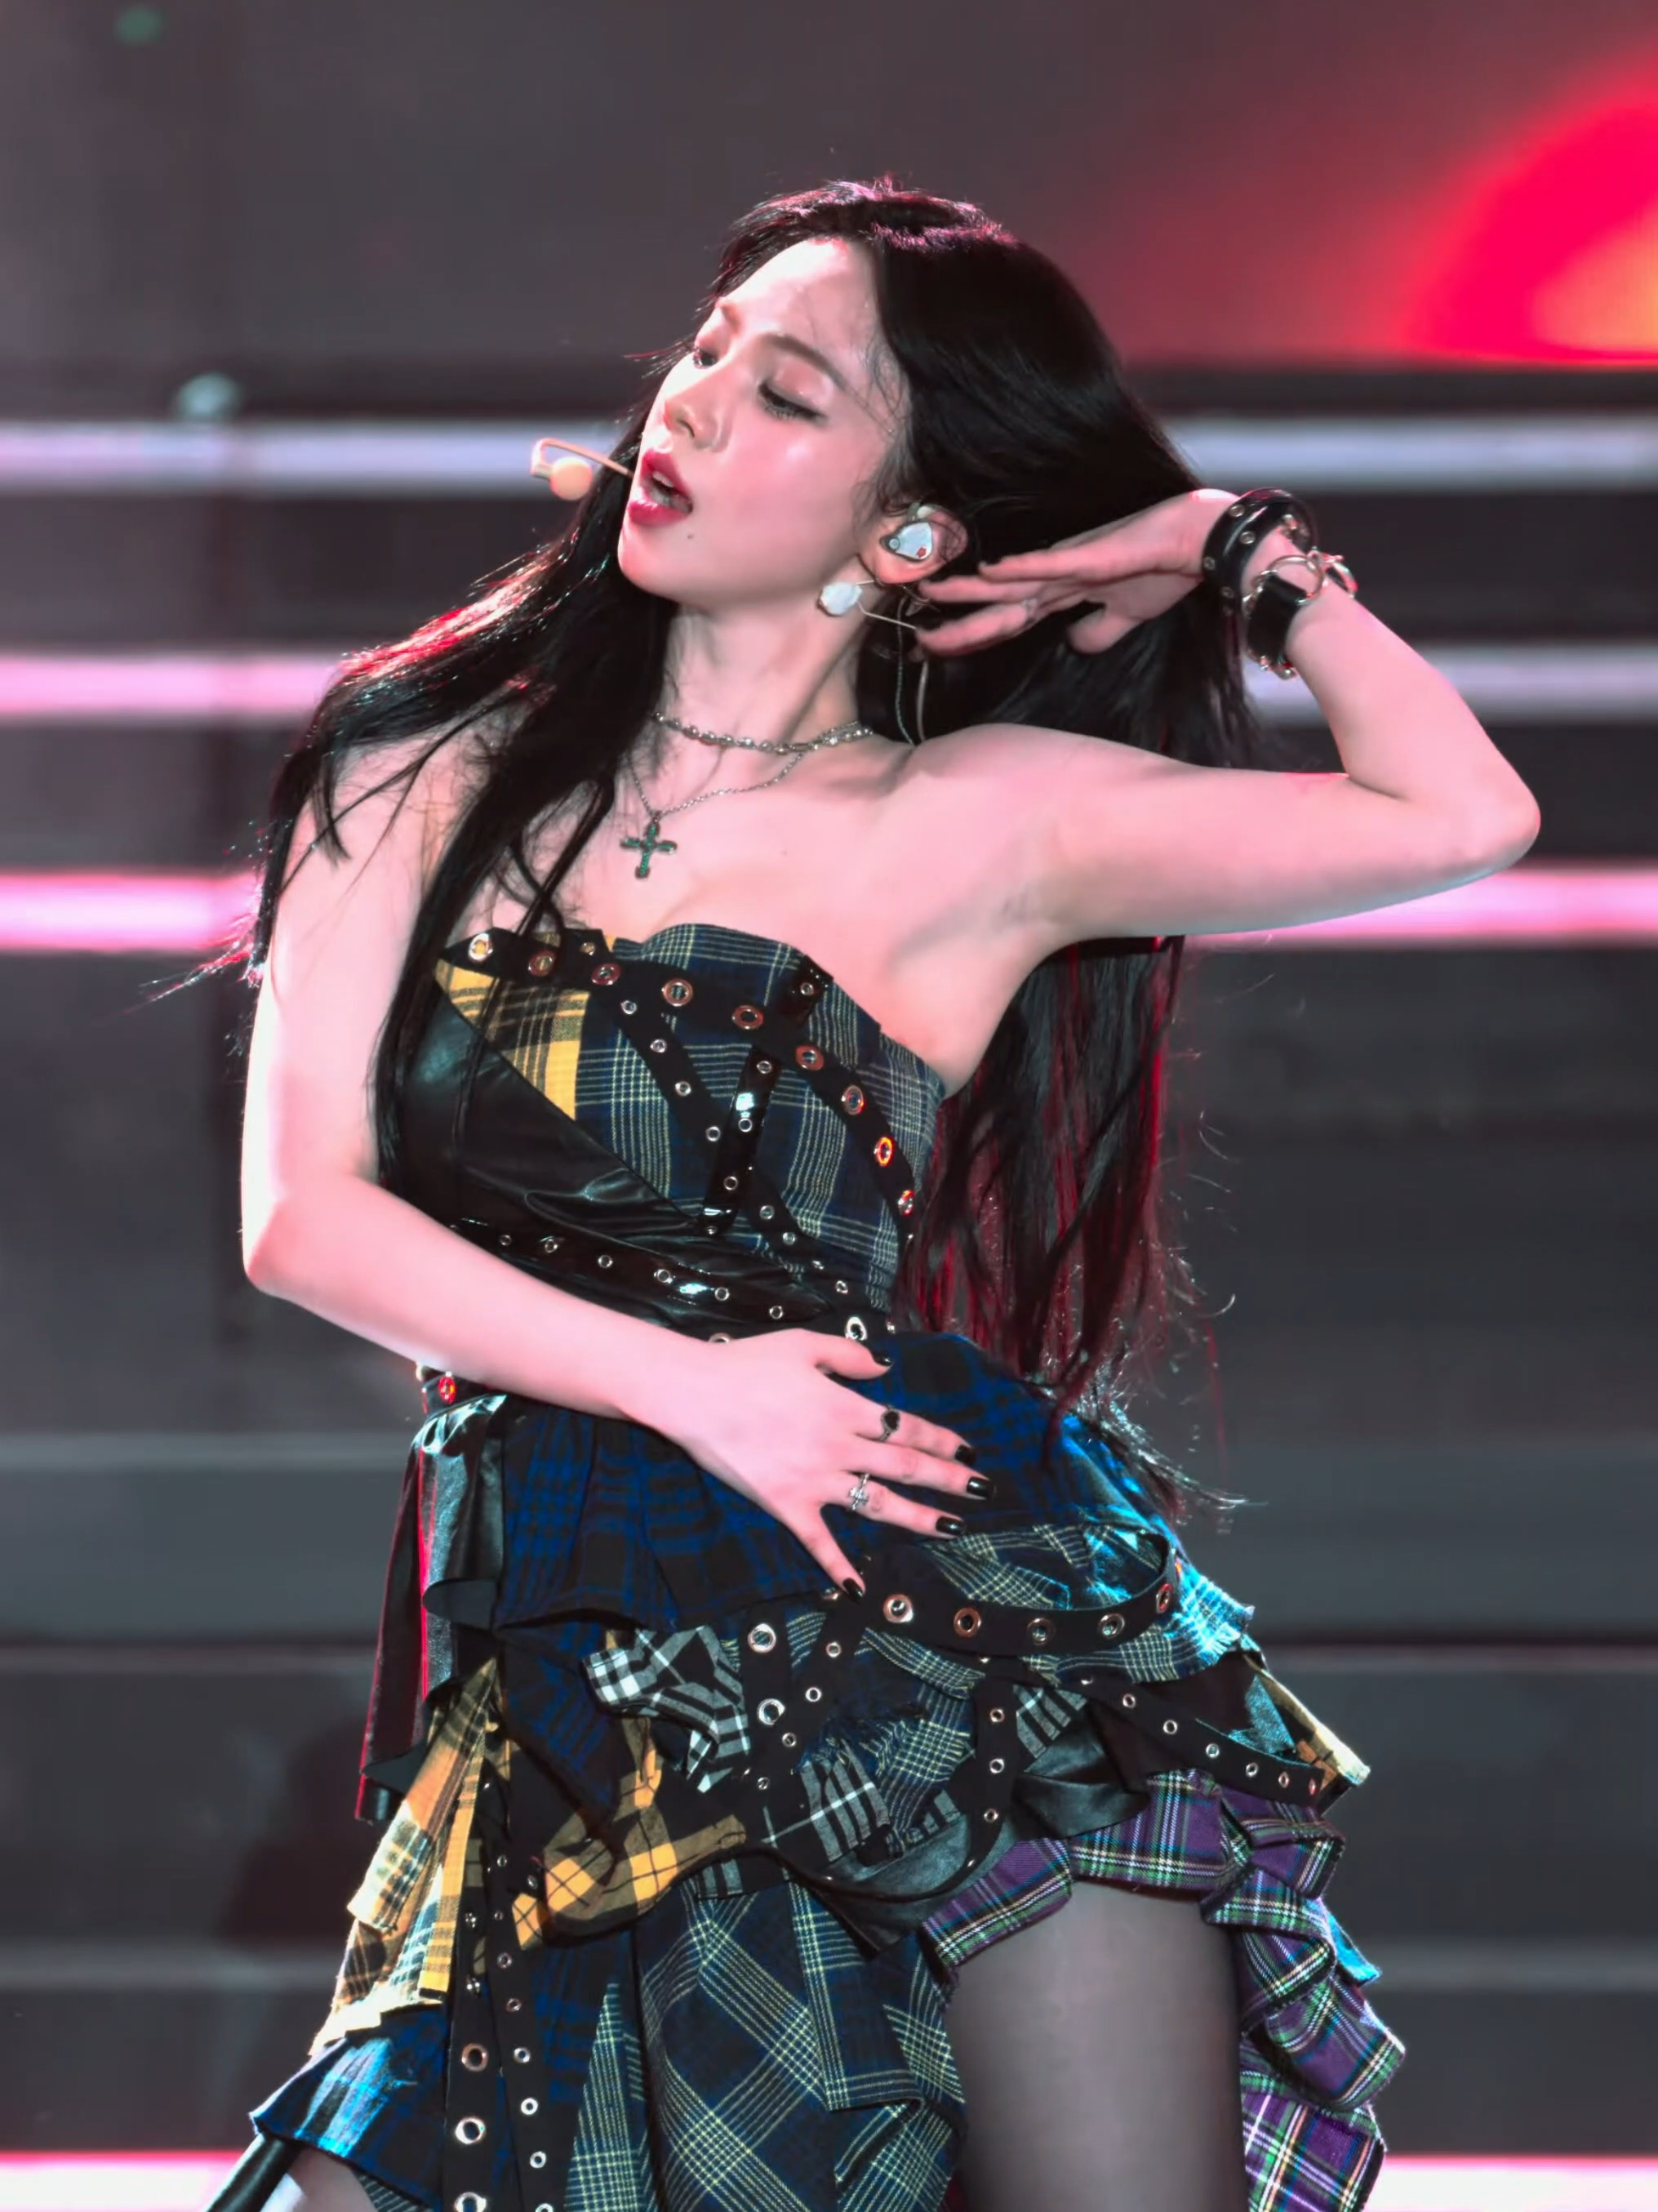 she embodies drama's concept so well #karina #aespa #fancam #fyp